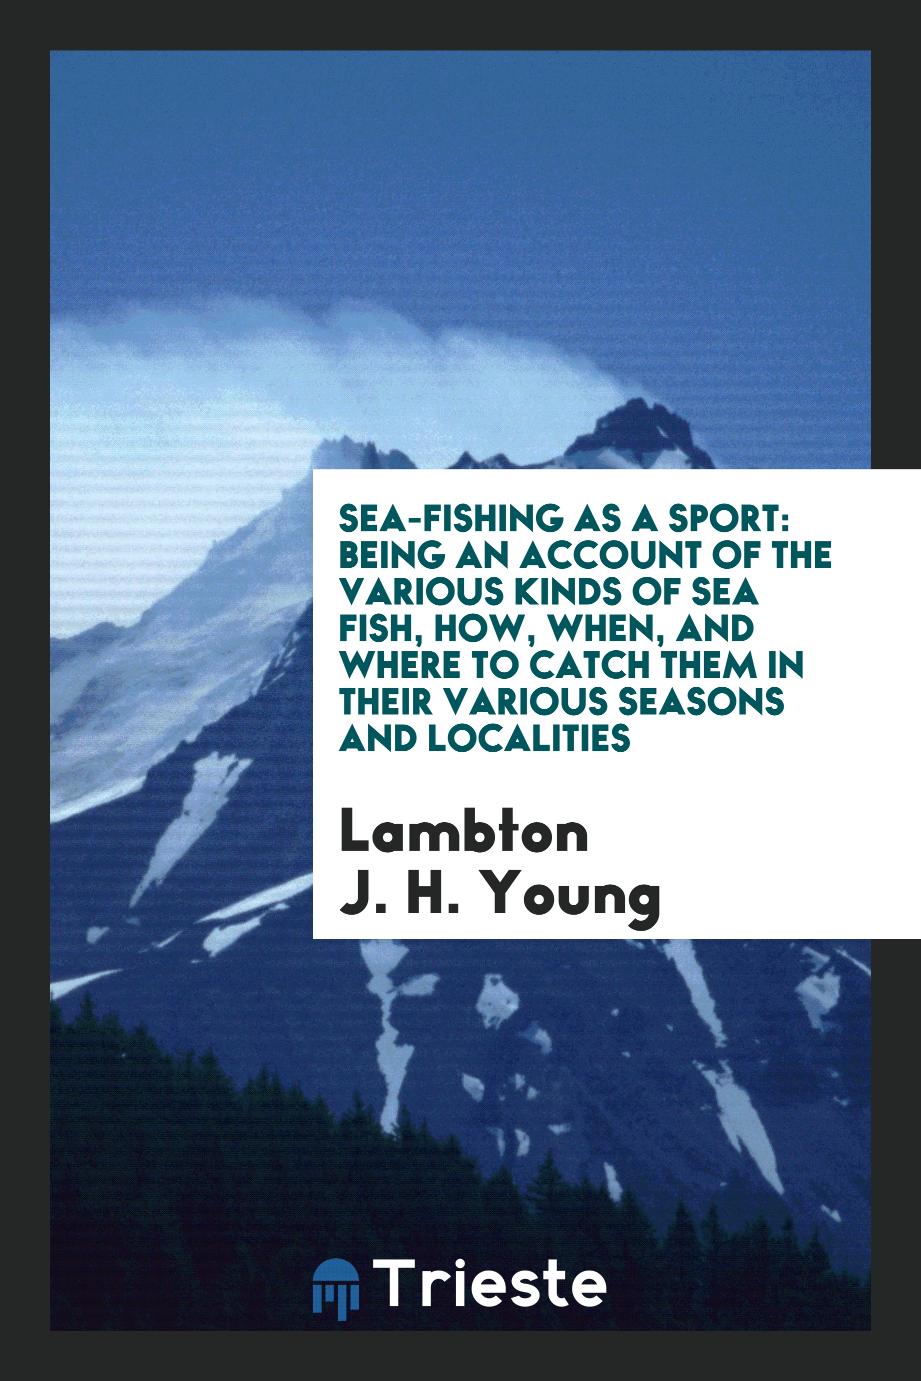 Sea-fishing as a sport: being an account of the various kinds of sea fish, how, when, and where to catch them in their various seasons and localities